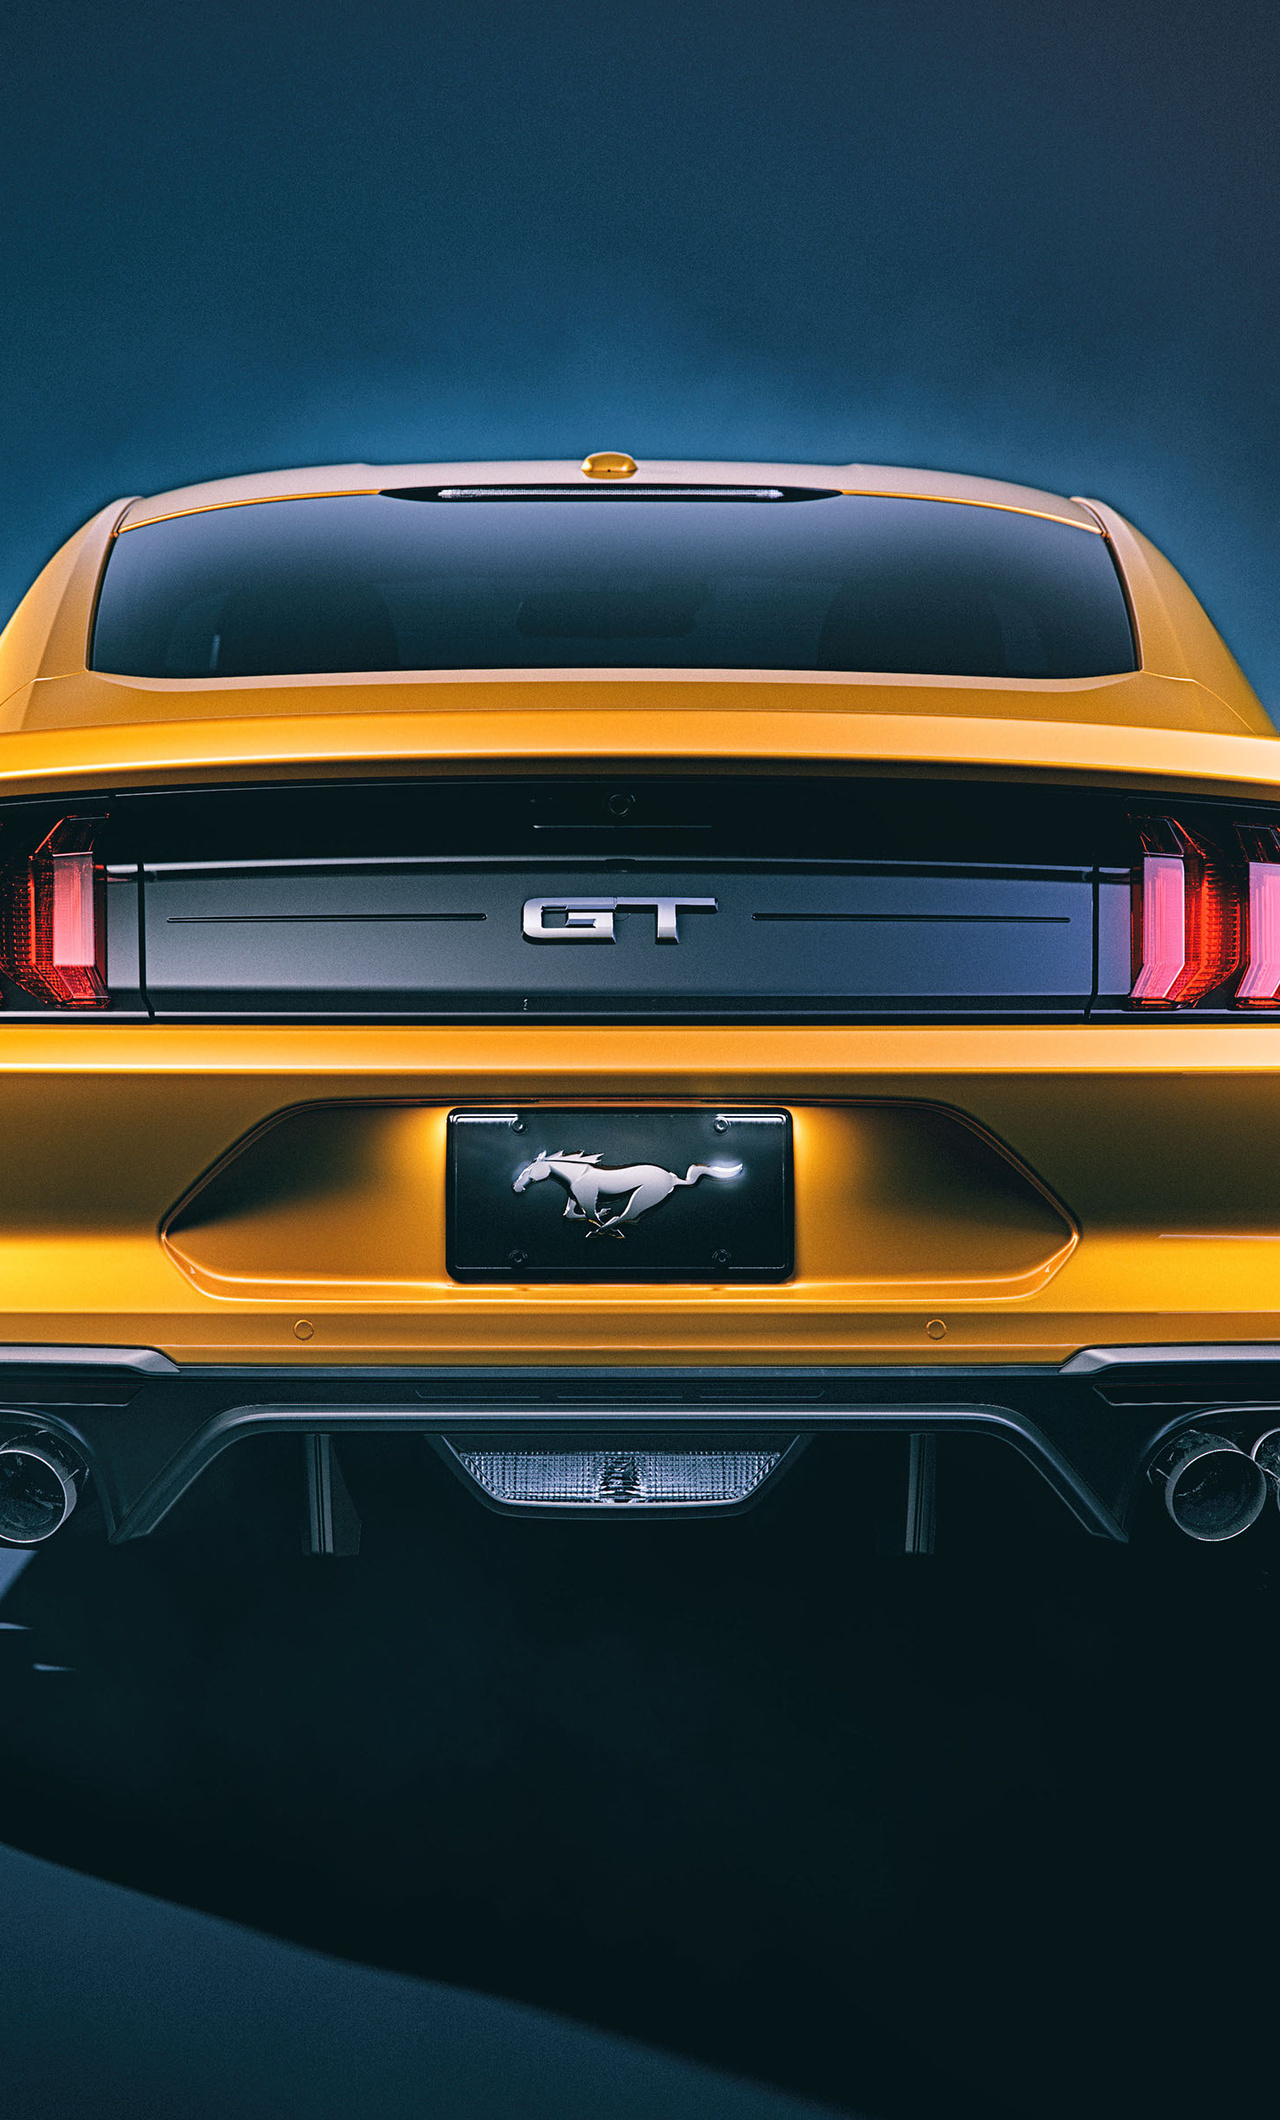 1280x2120 Ford Mustang Gt Rear 4k Iphone 6 Hd 4k Wallpapers Images Backgrounds Photos And Pictures